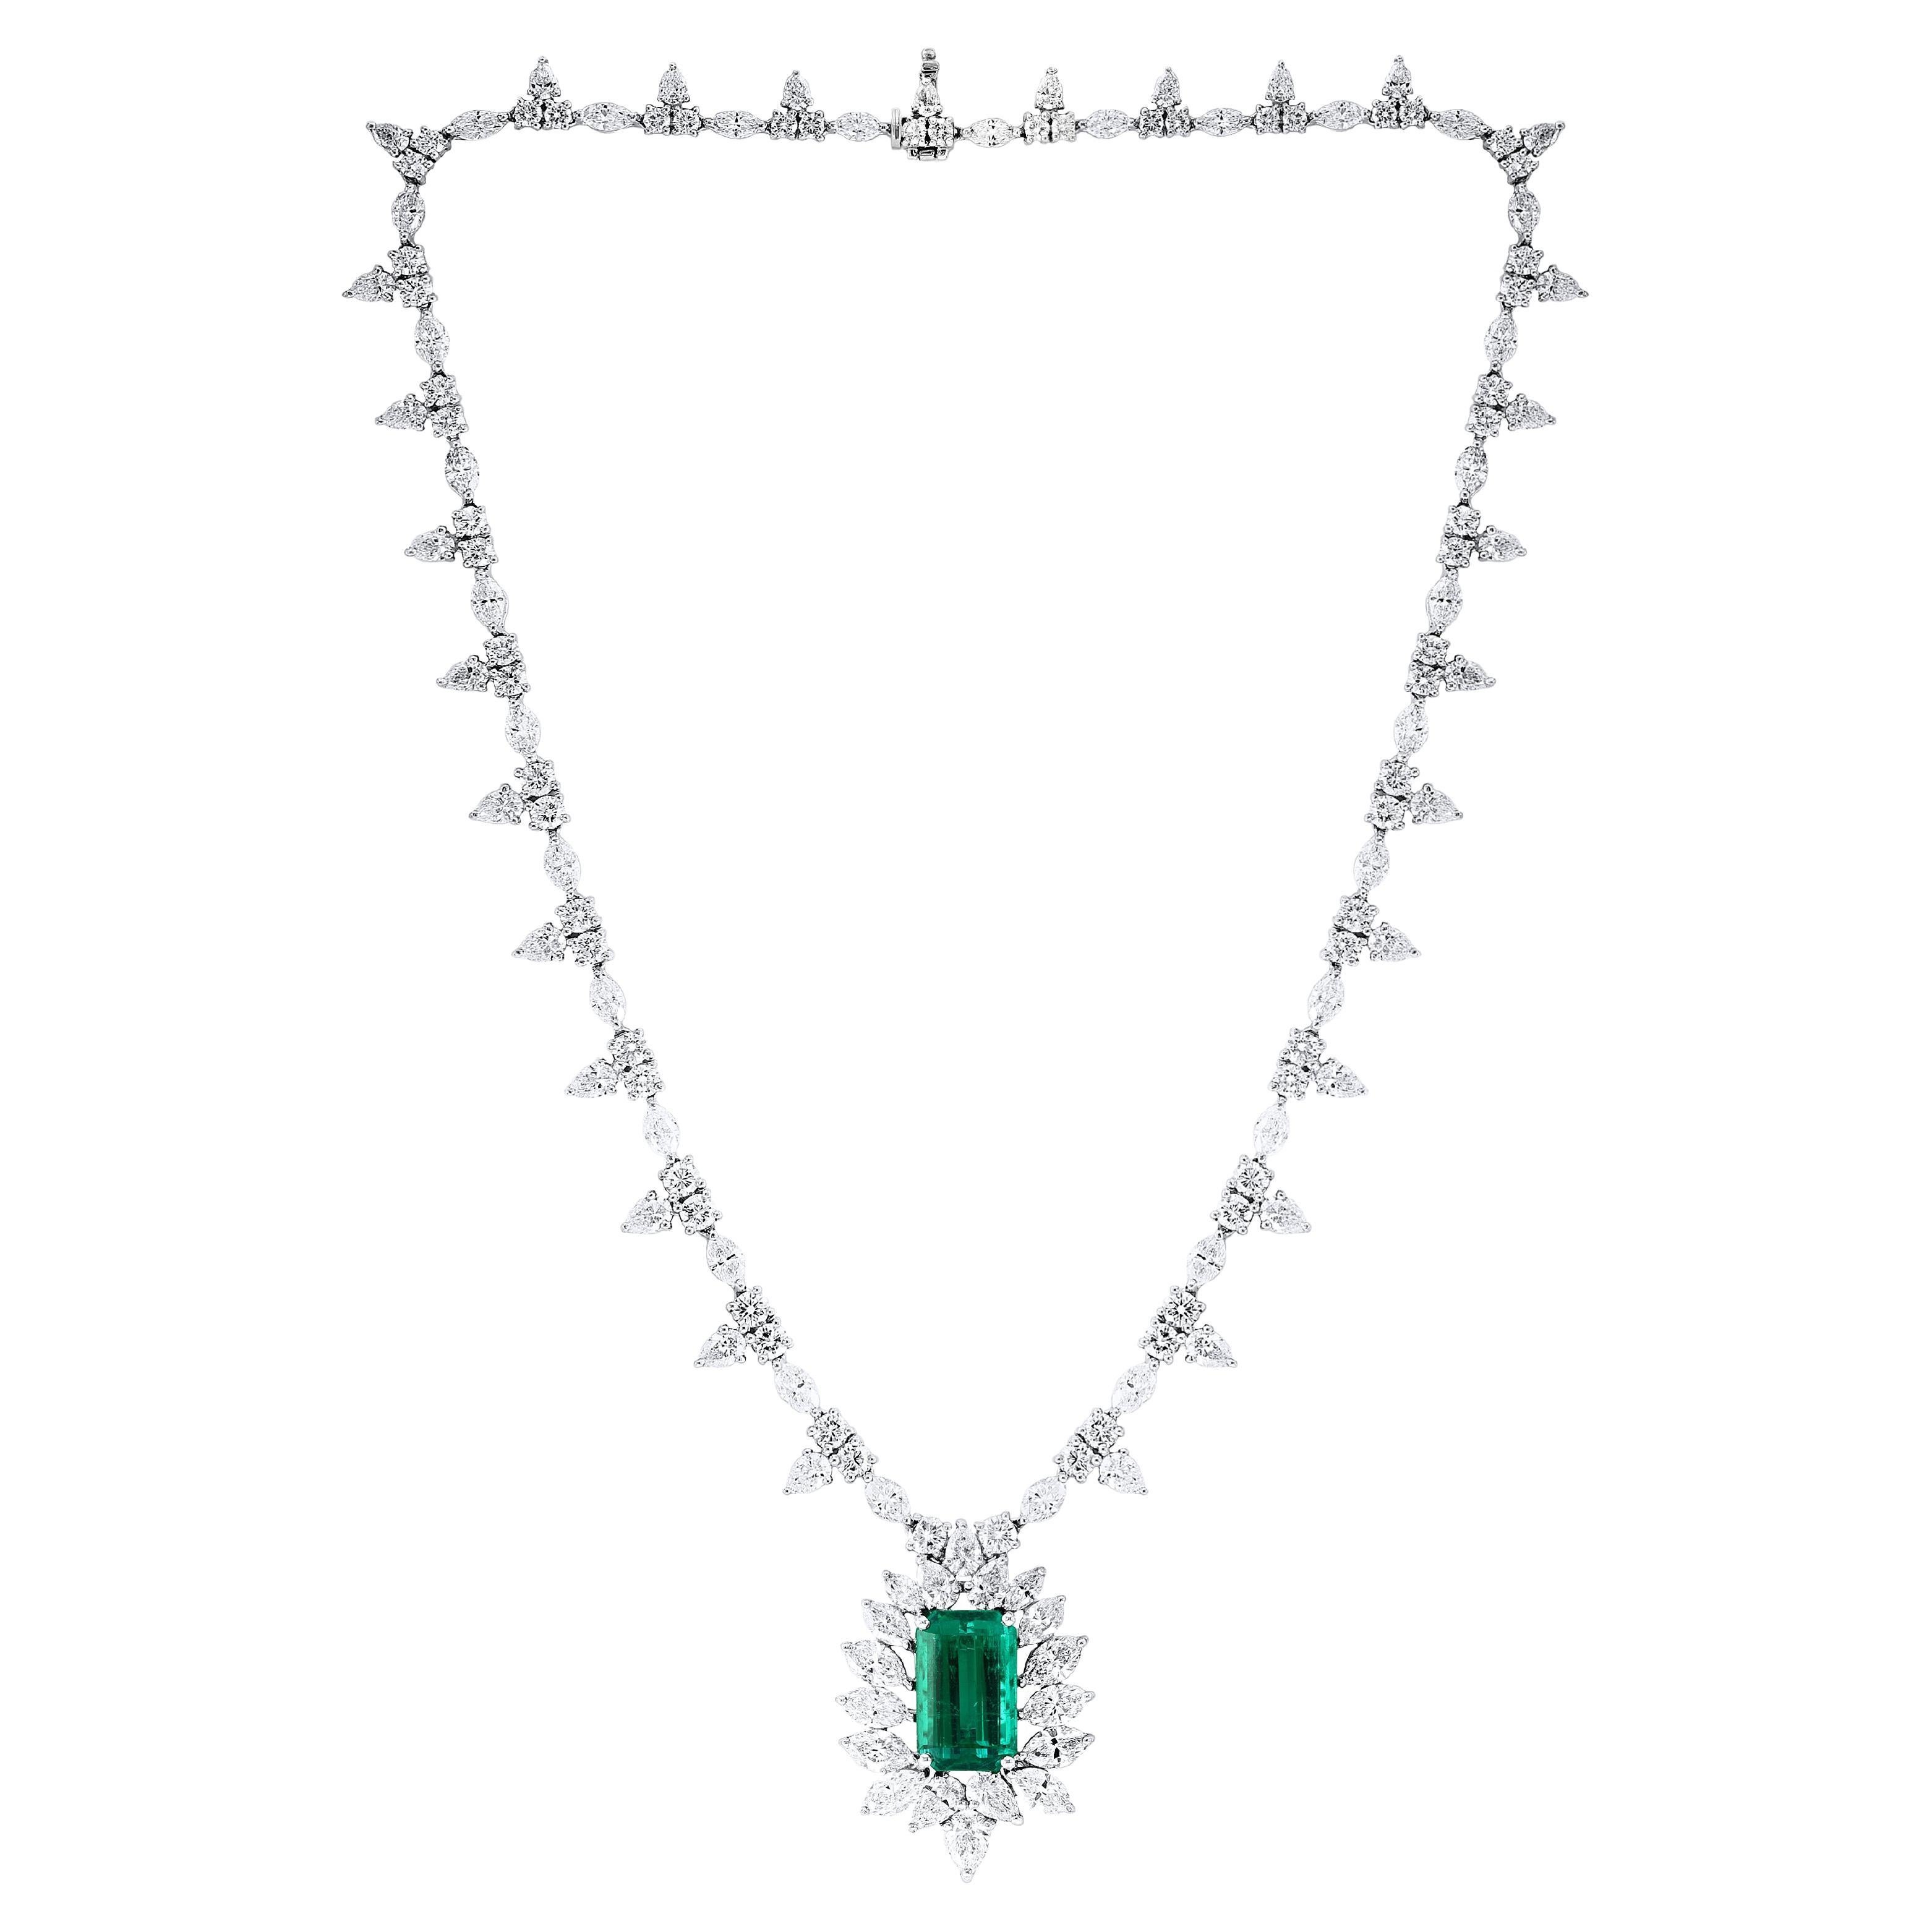 CERTIFIED 8.14 Carat Emerald and Diamond Necklace in Platinum For Sale